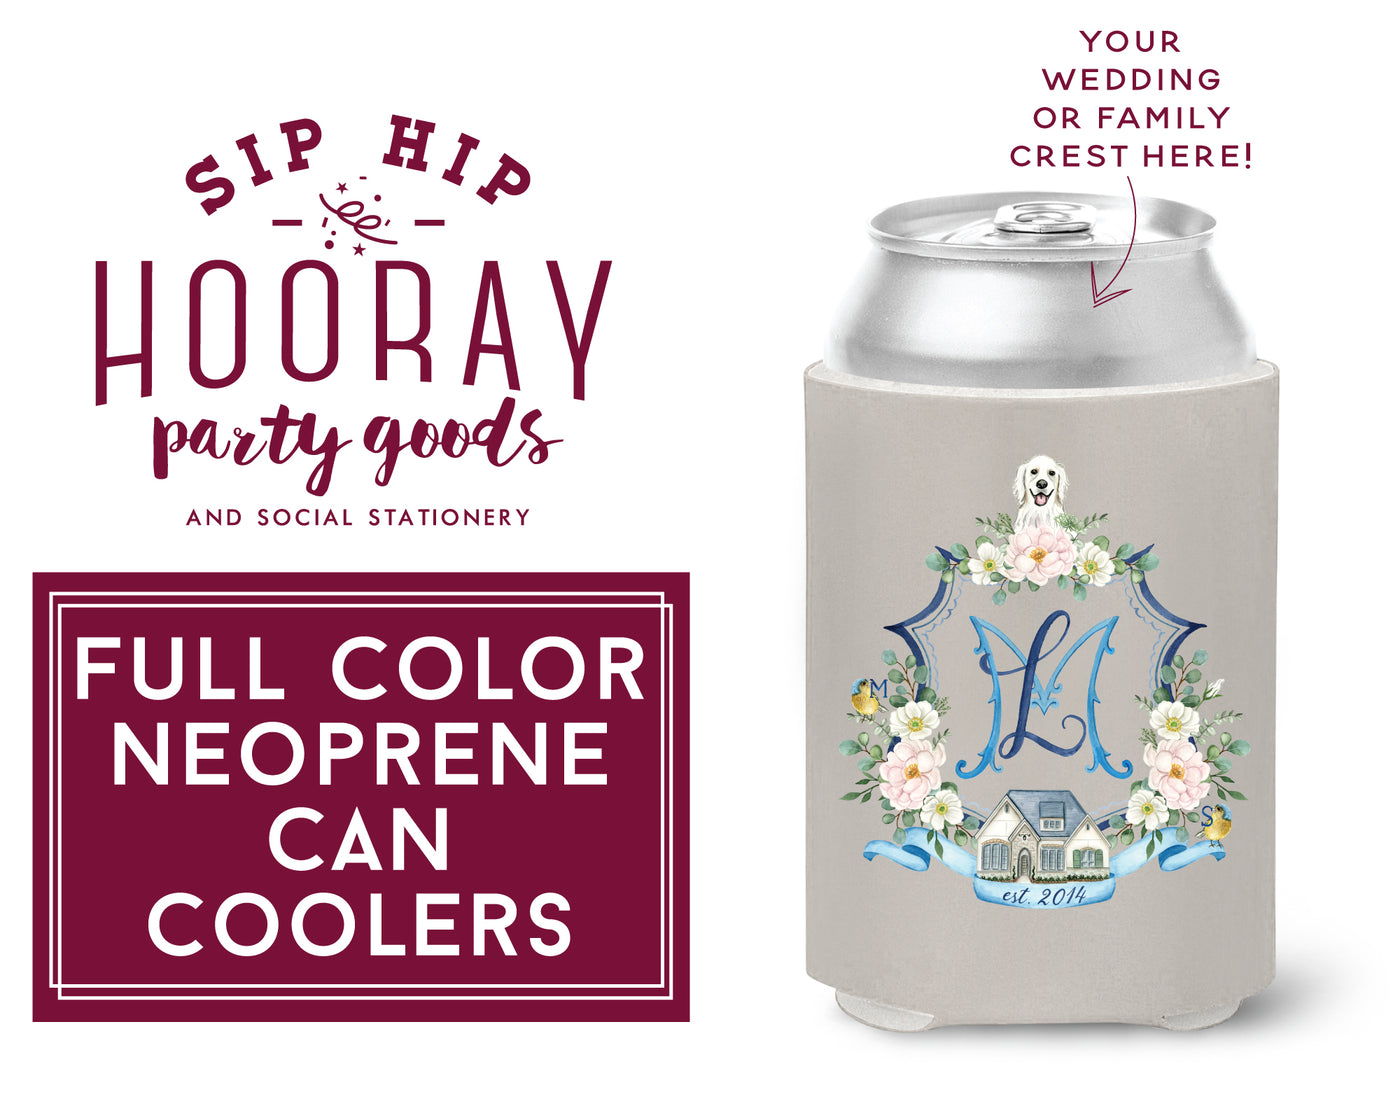 Custom Wedding Crest Neoprene Can Coolers, Multi Color Print Can Coolers, Personalized Party Favor, Bachelorette, Birthday